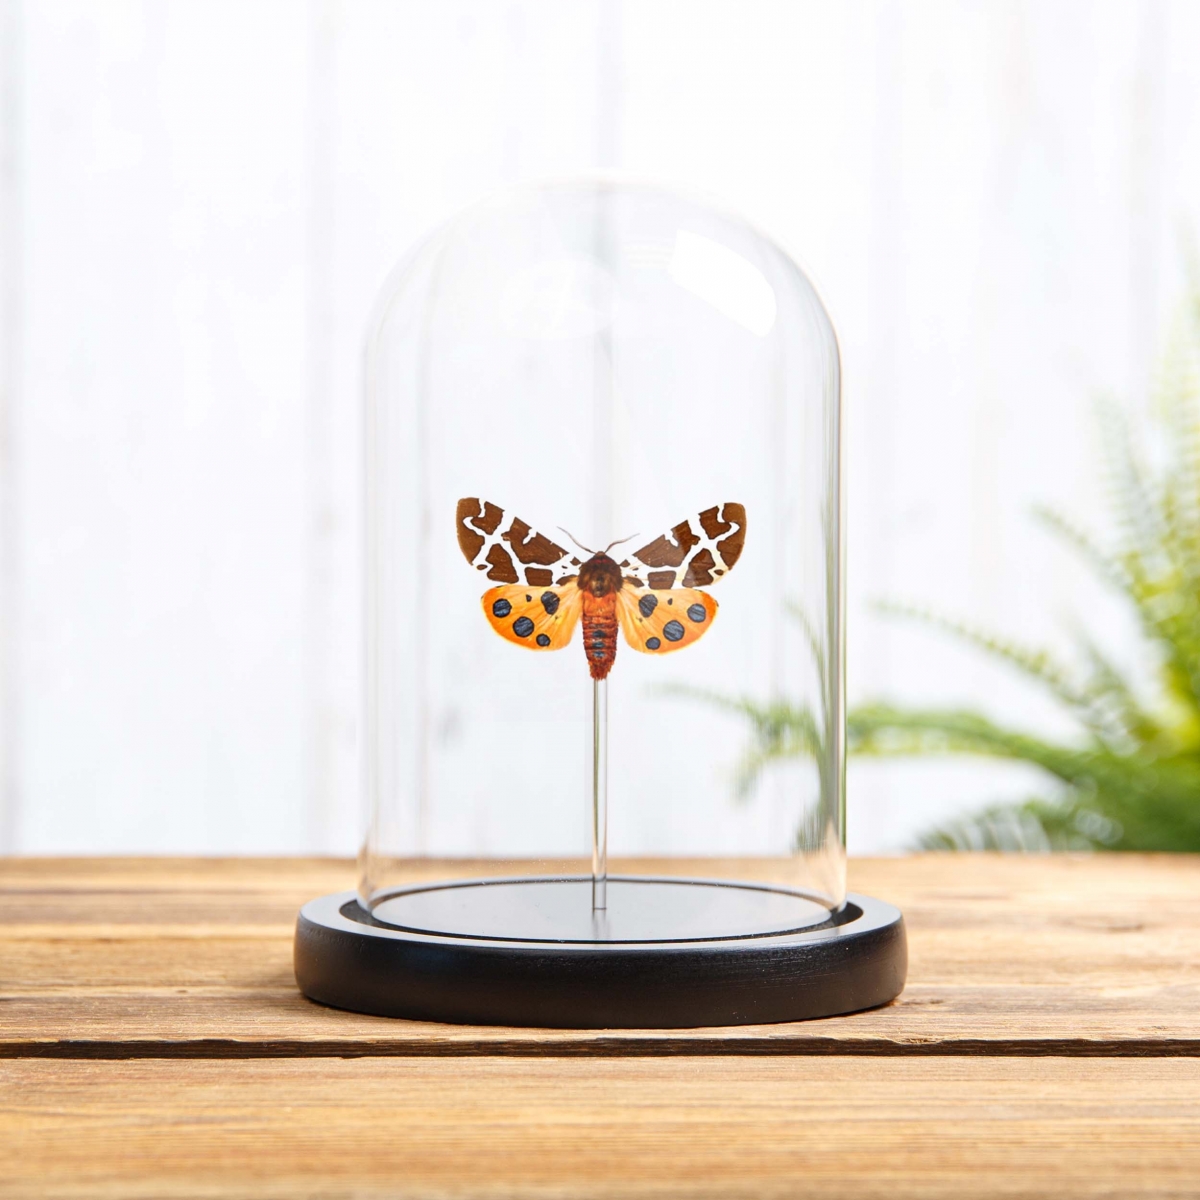 Minibeast The Garden Tiger Moth in Glass Dome with Wooden Base (Arctia caja)